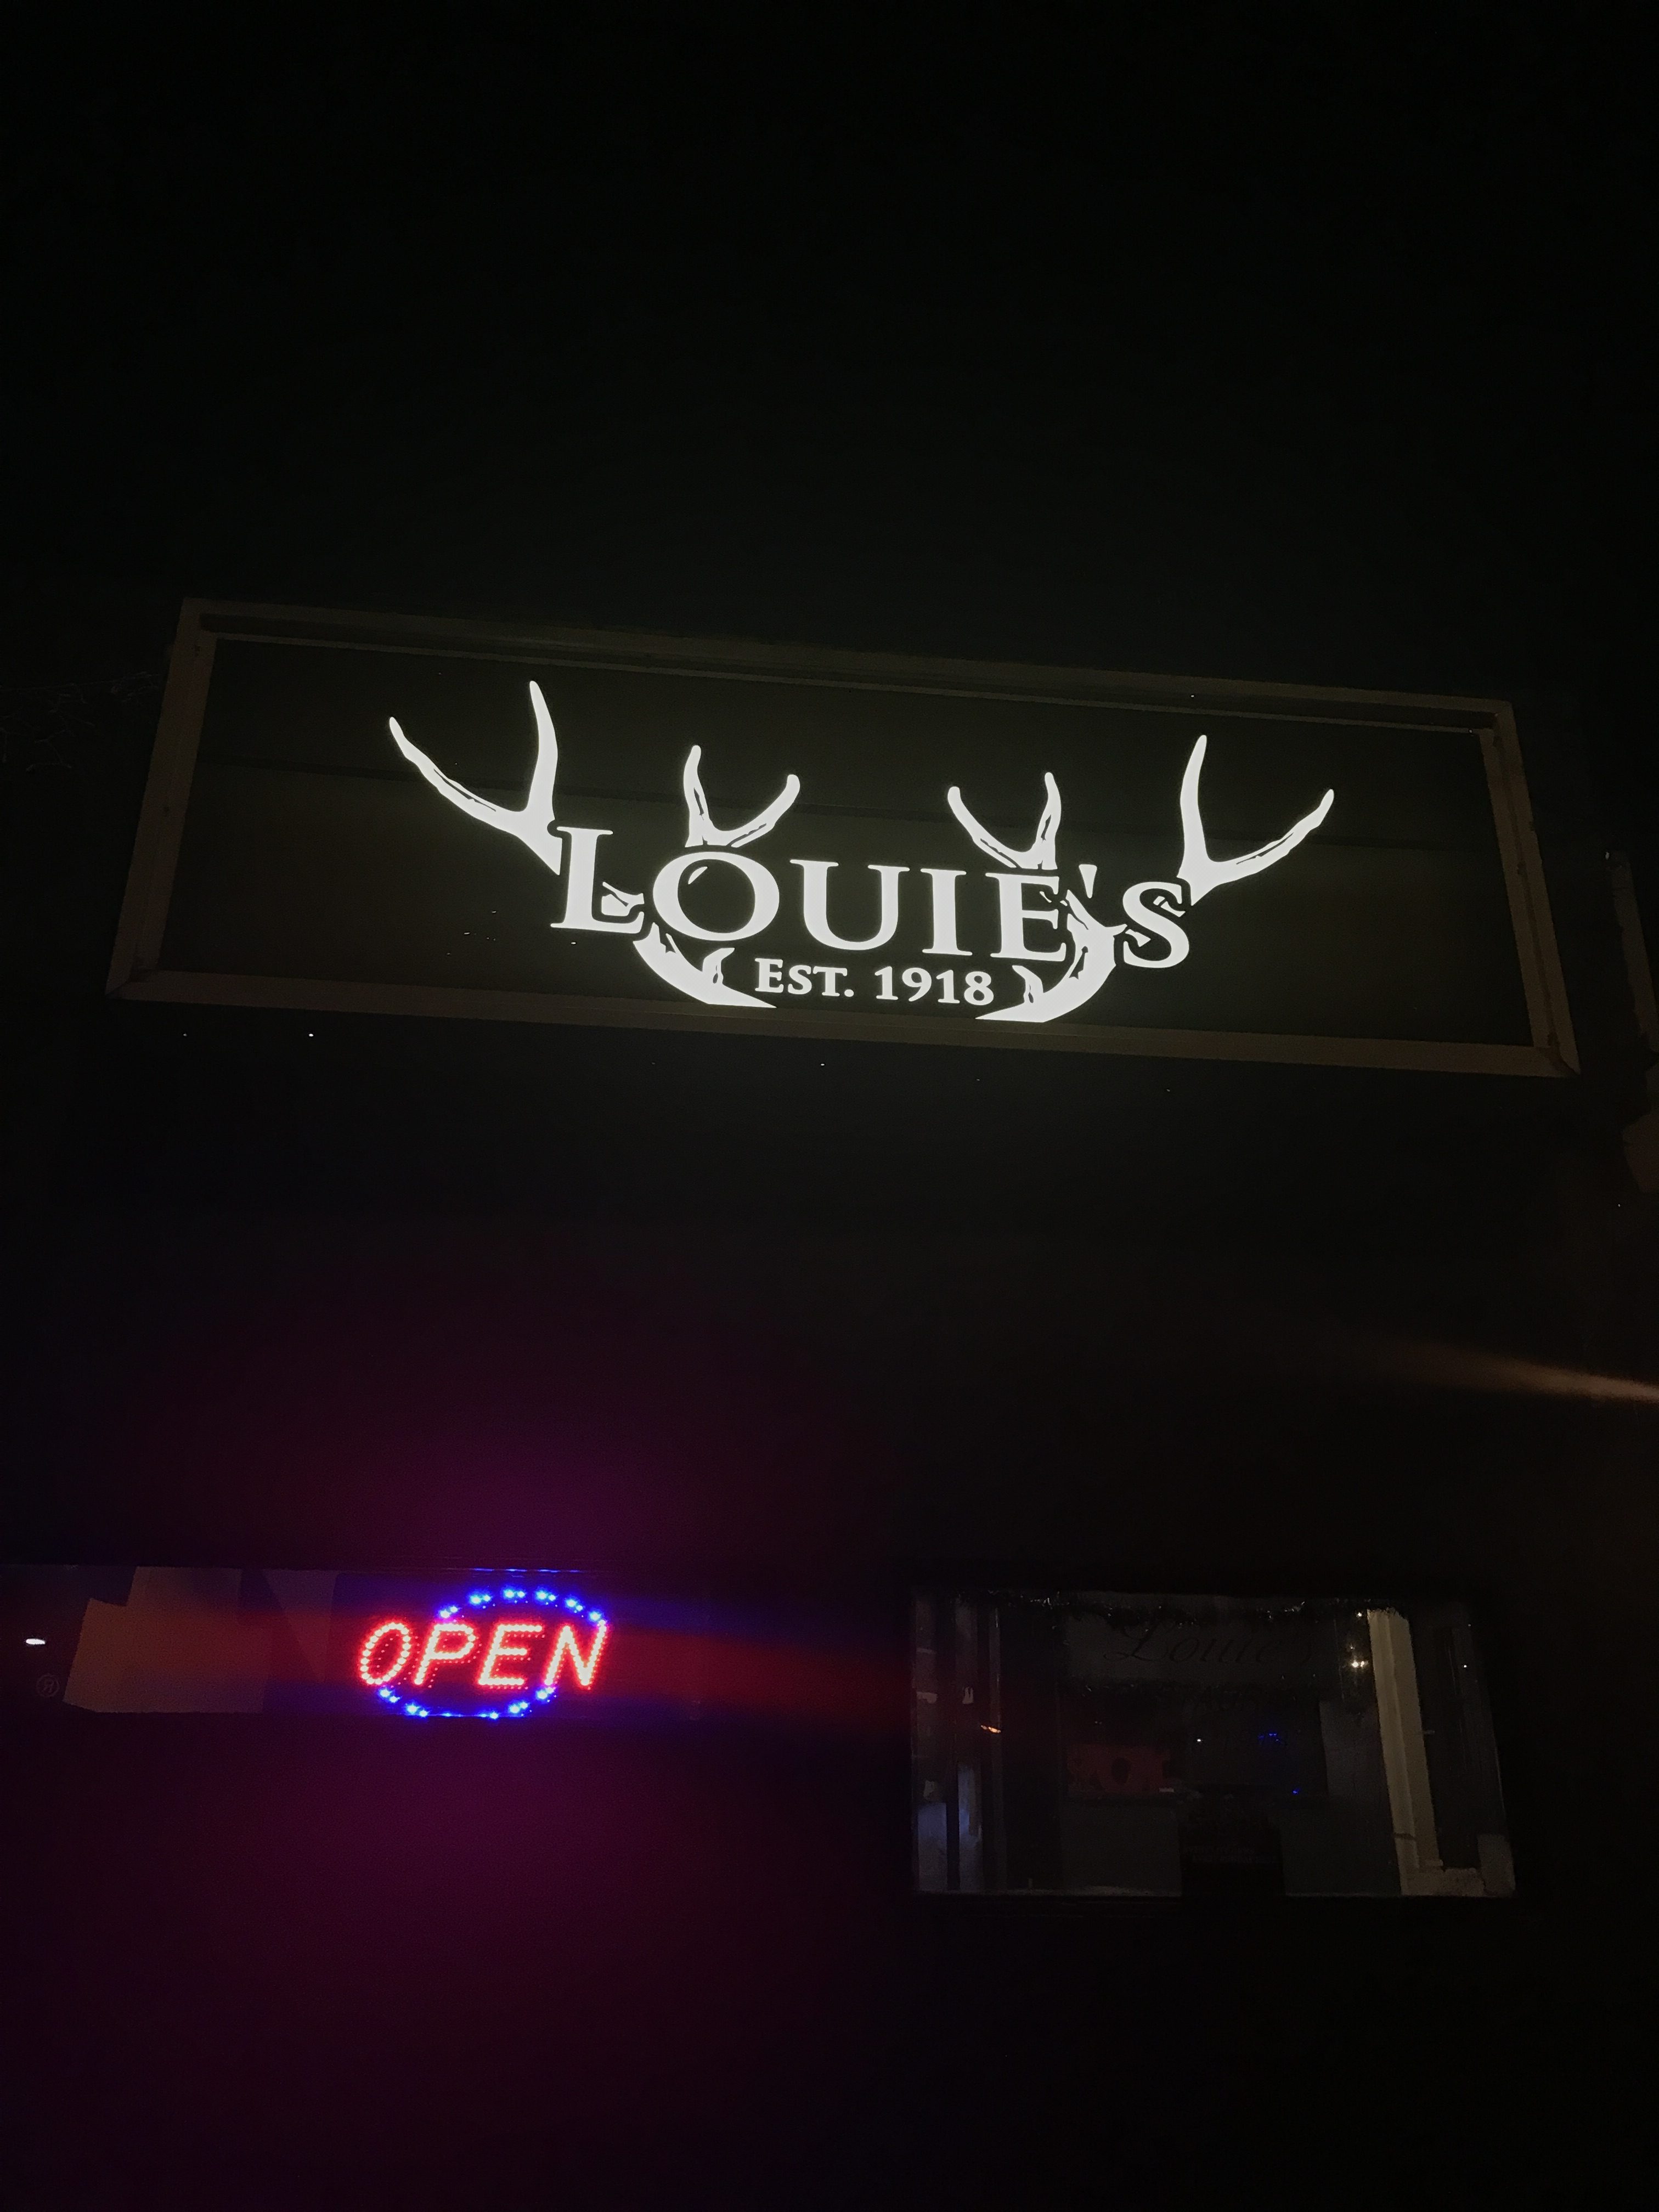 Dinner at Louie’s